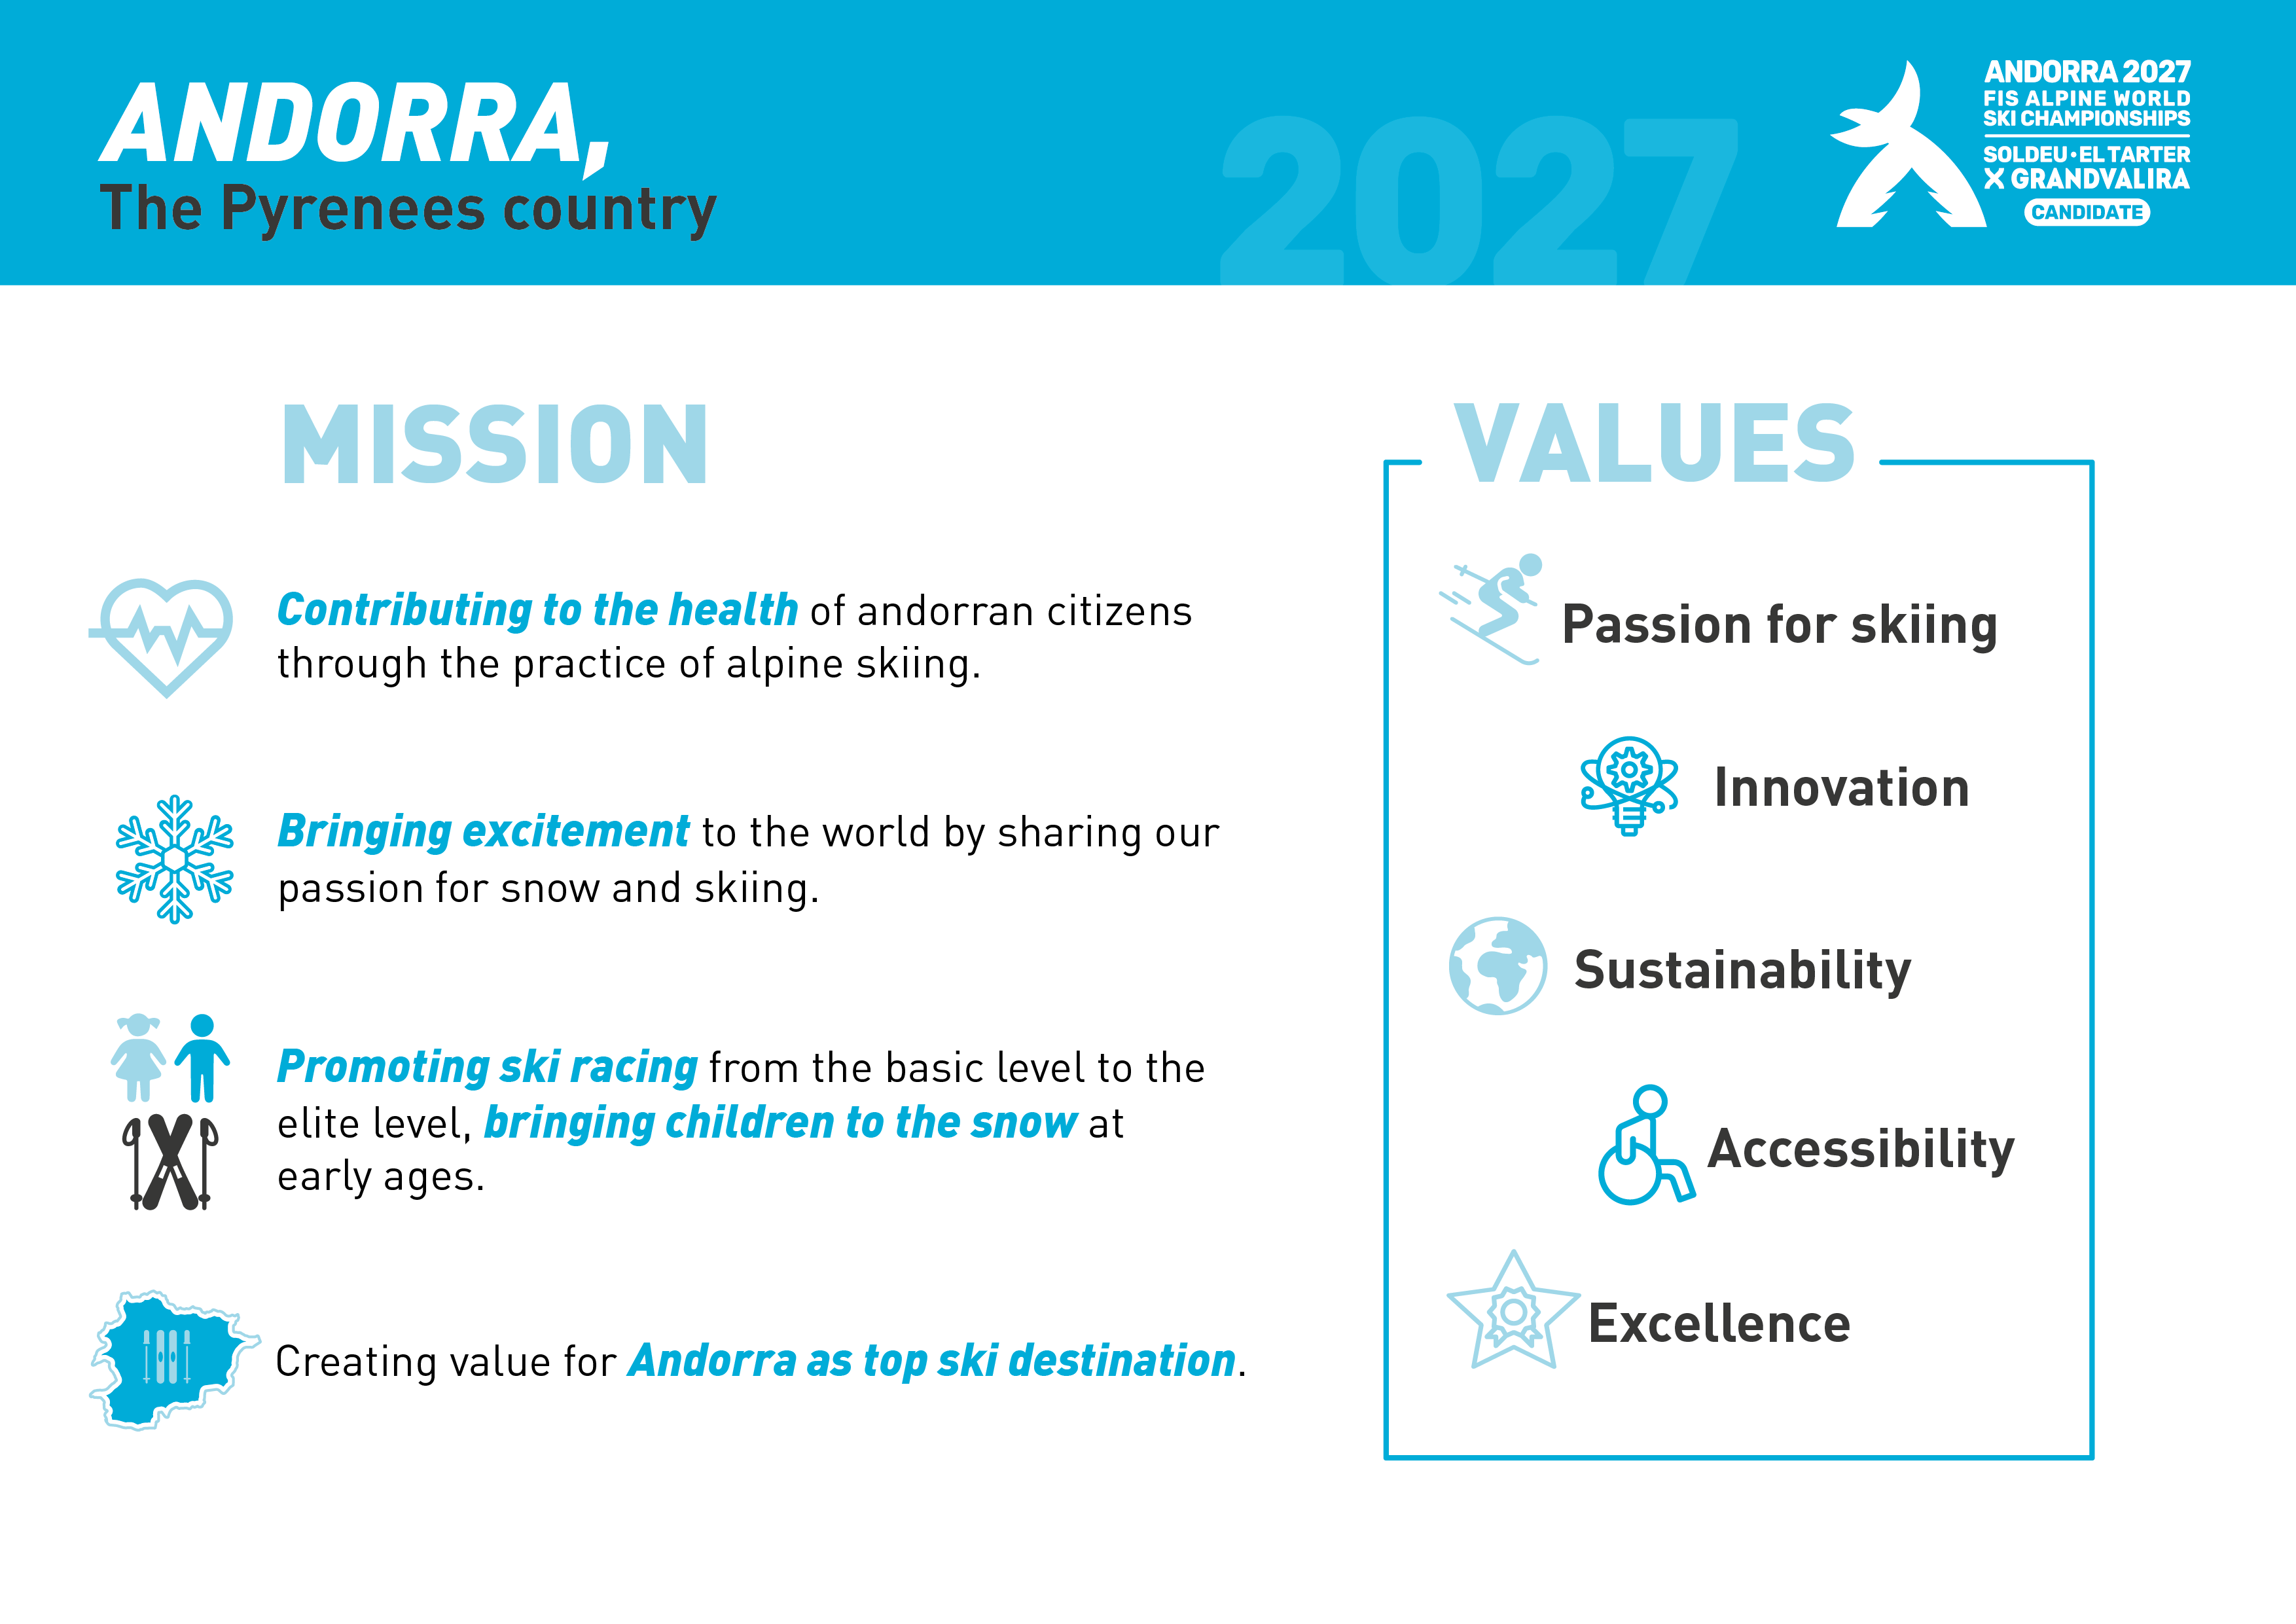 AWSC27 ANDORRA CANDIDACY VALUES AND MISSION